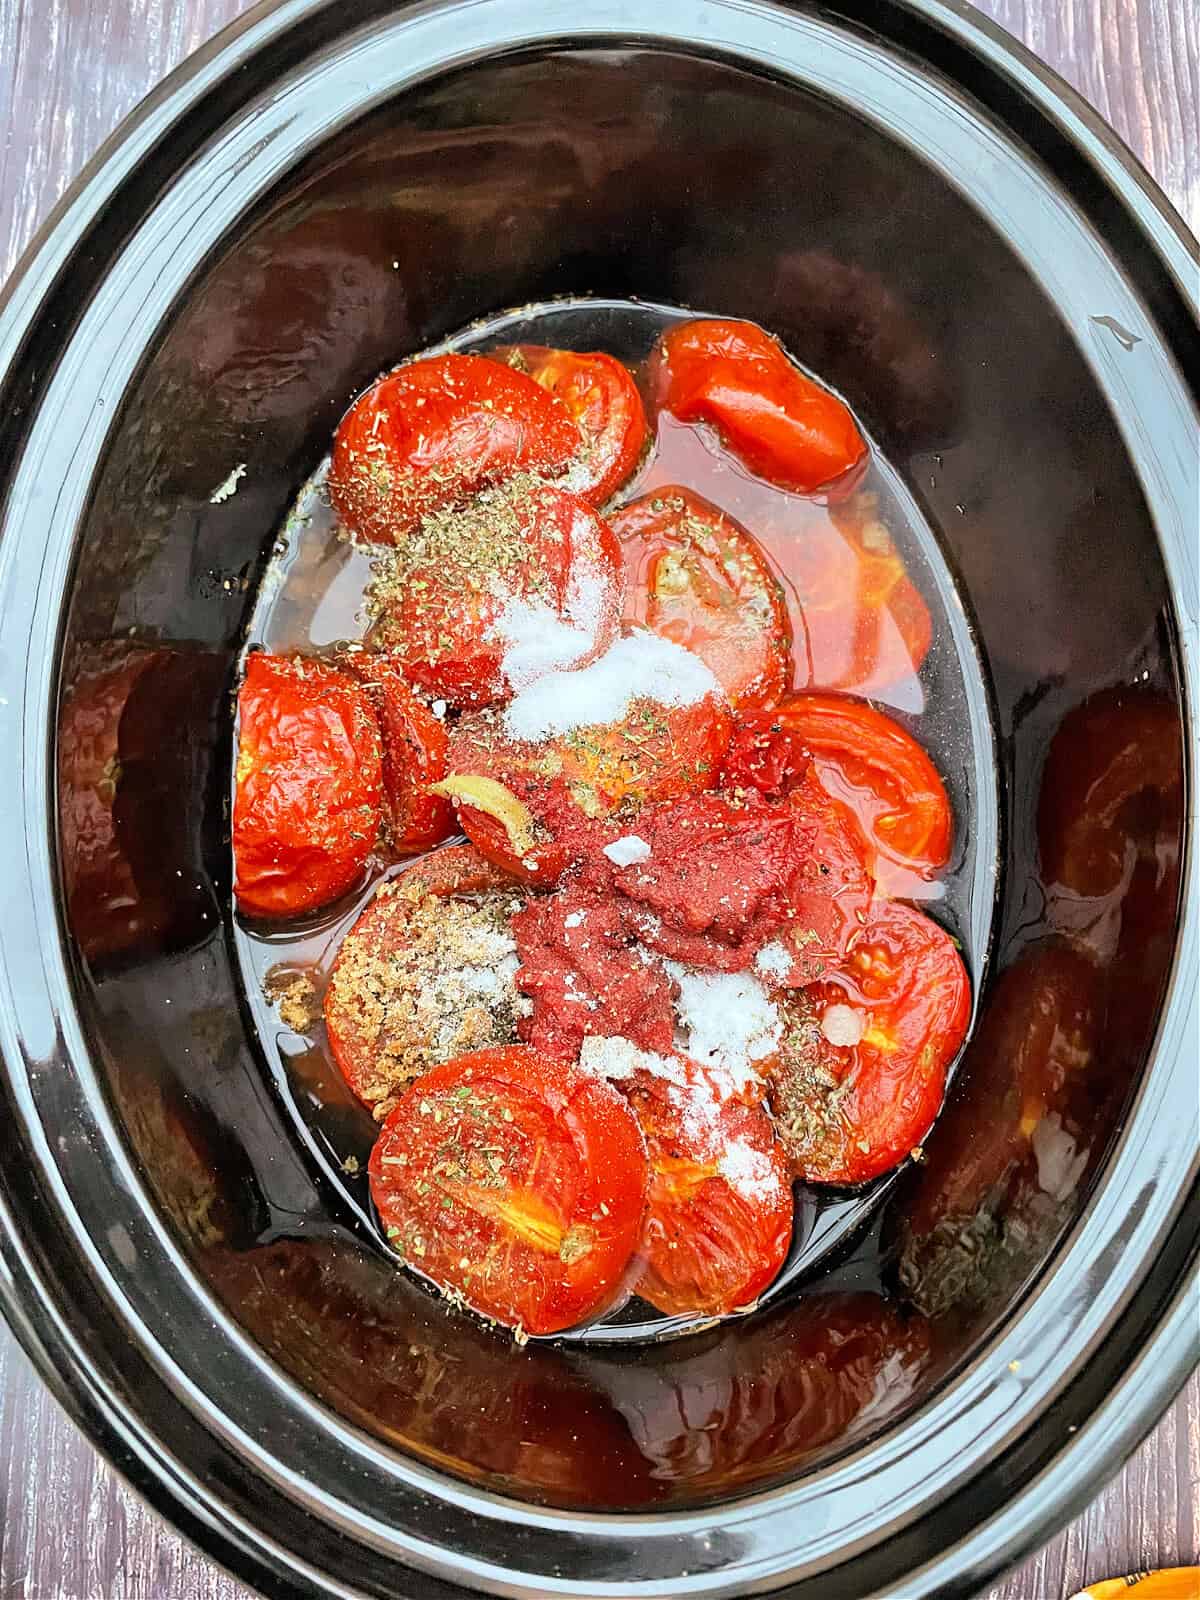 Tomato soup ingredients in slow cooker pot.